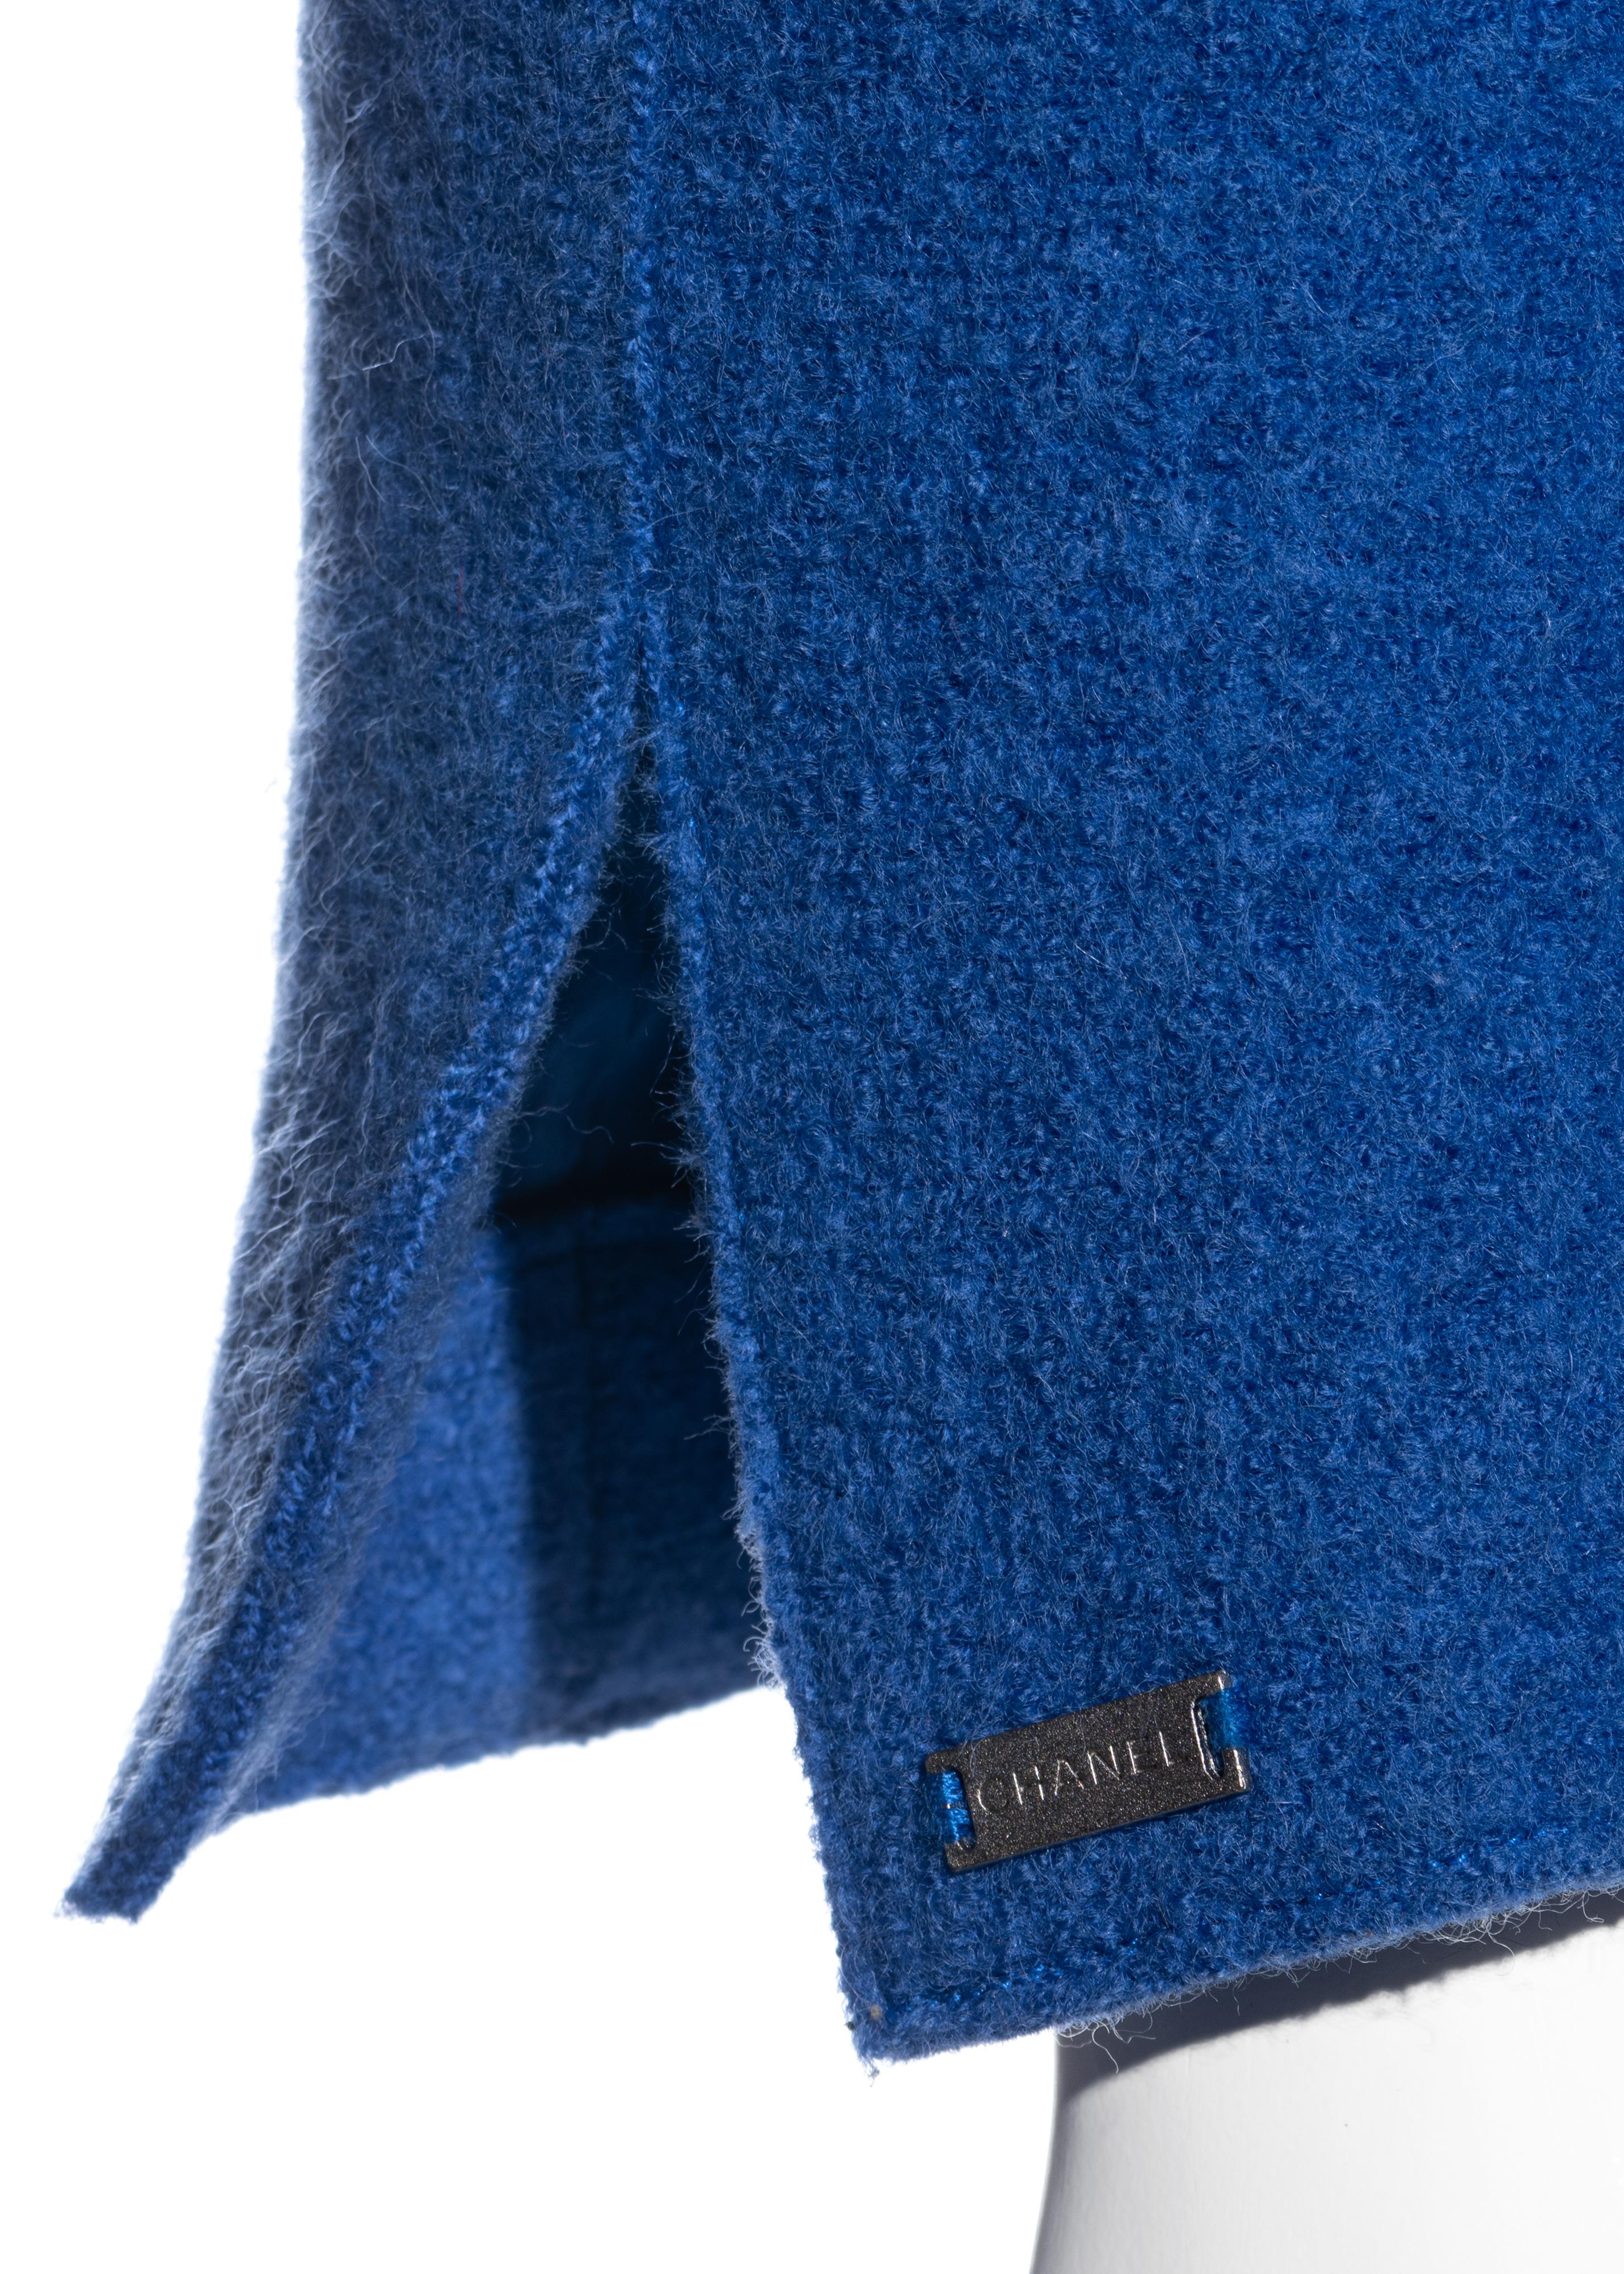 Women's Chanel by Karl Lagerfeld blue boiled wool fitted jacket, fw 1999